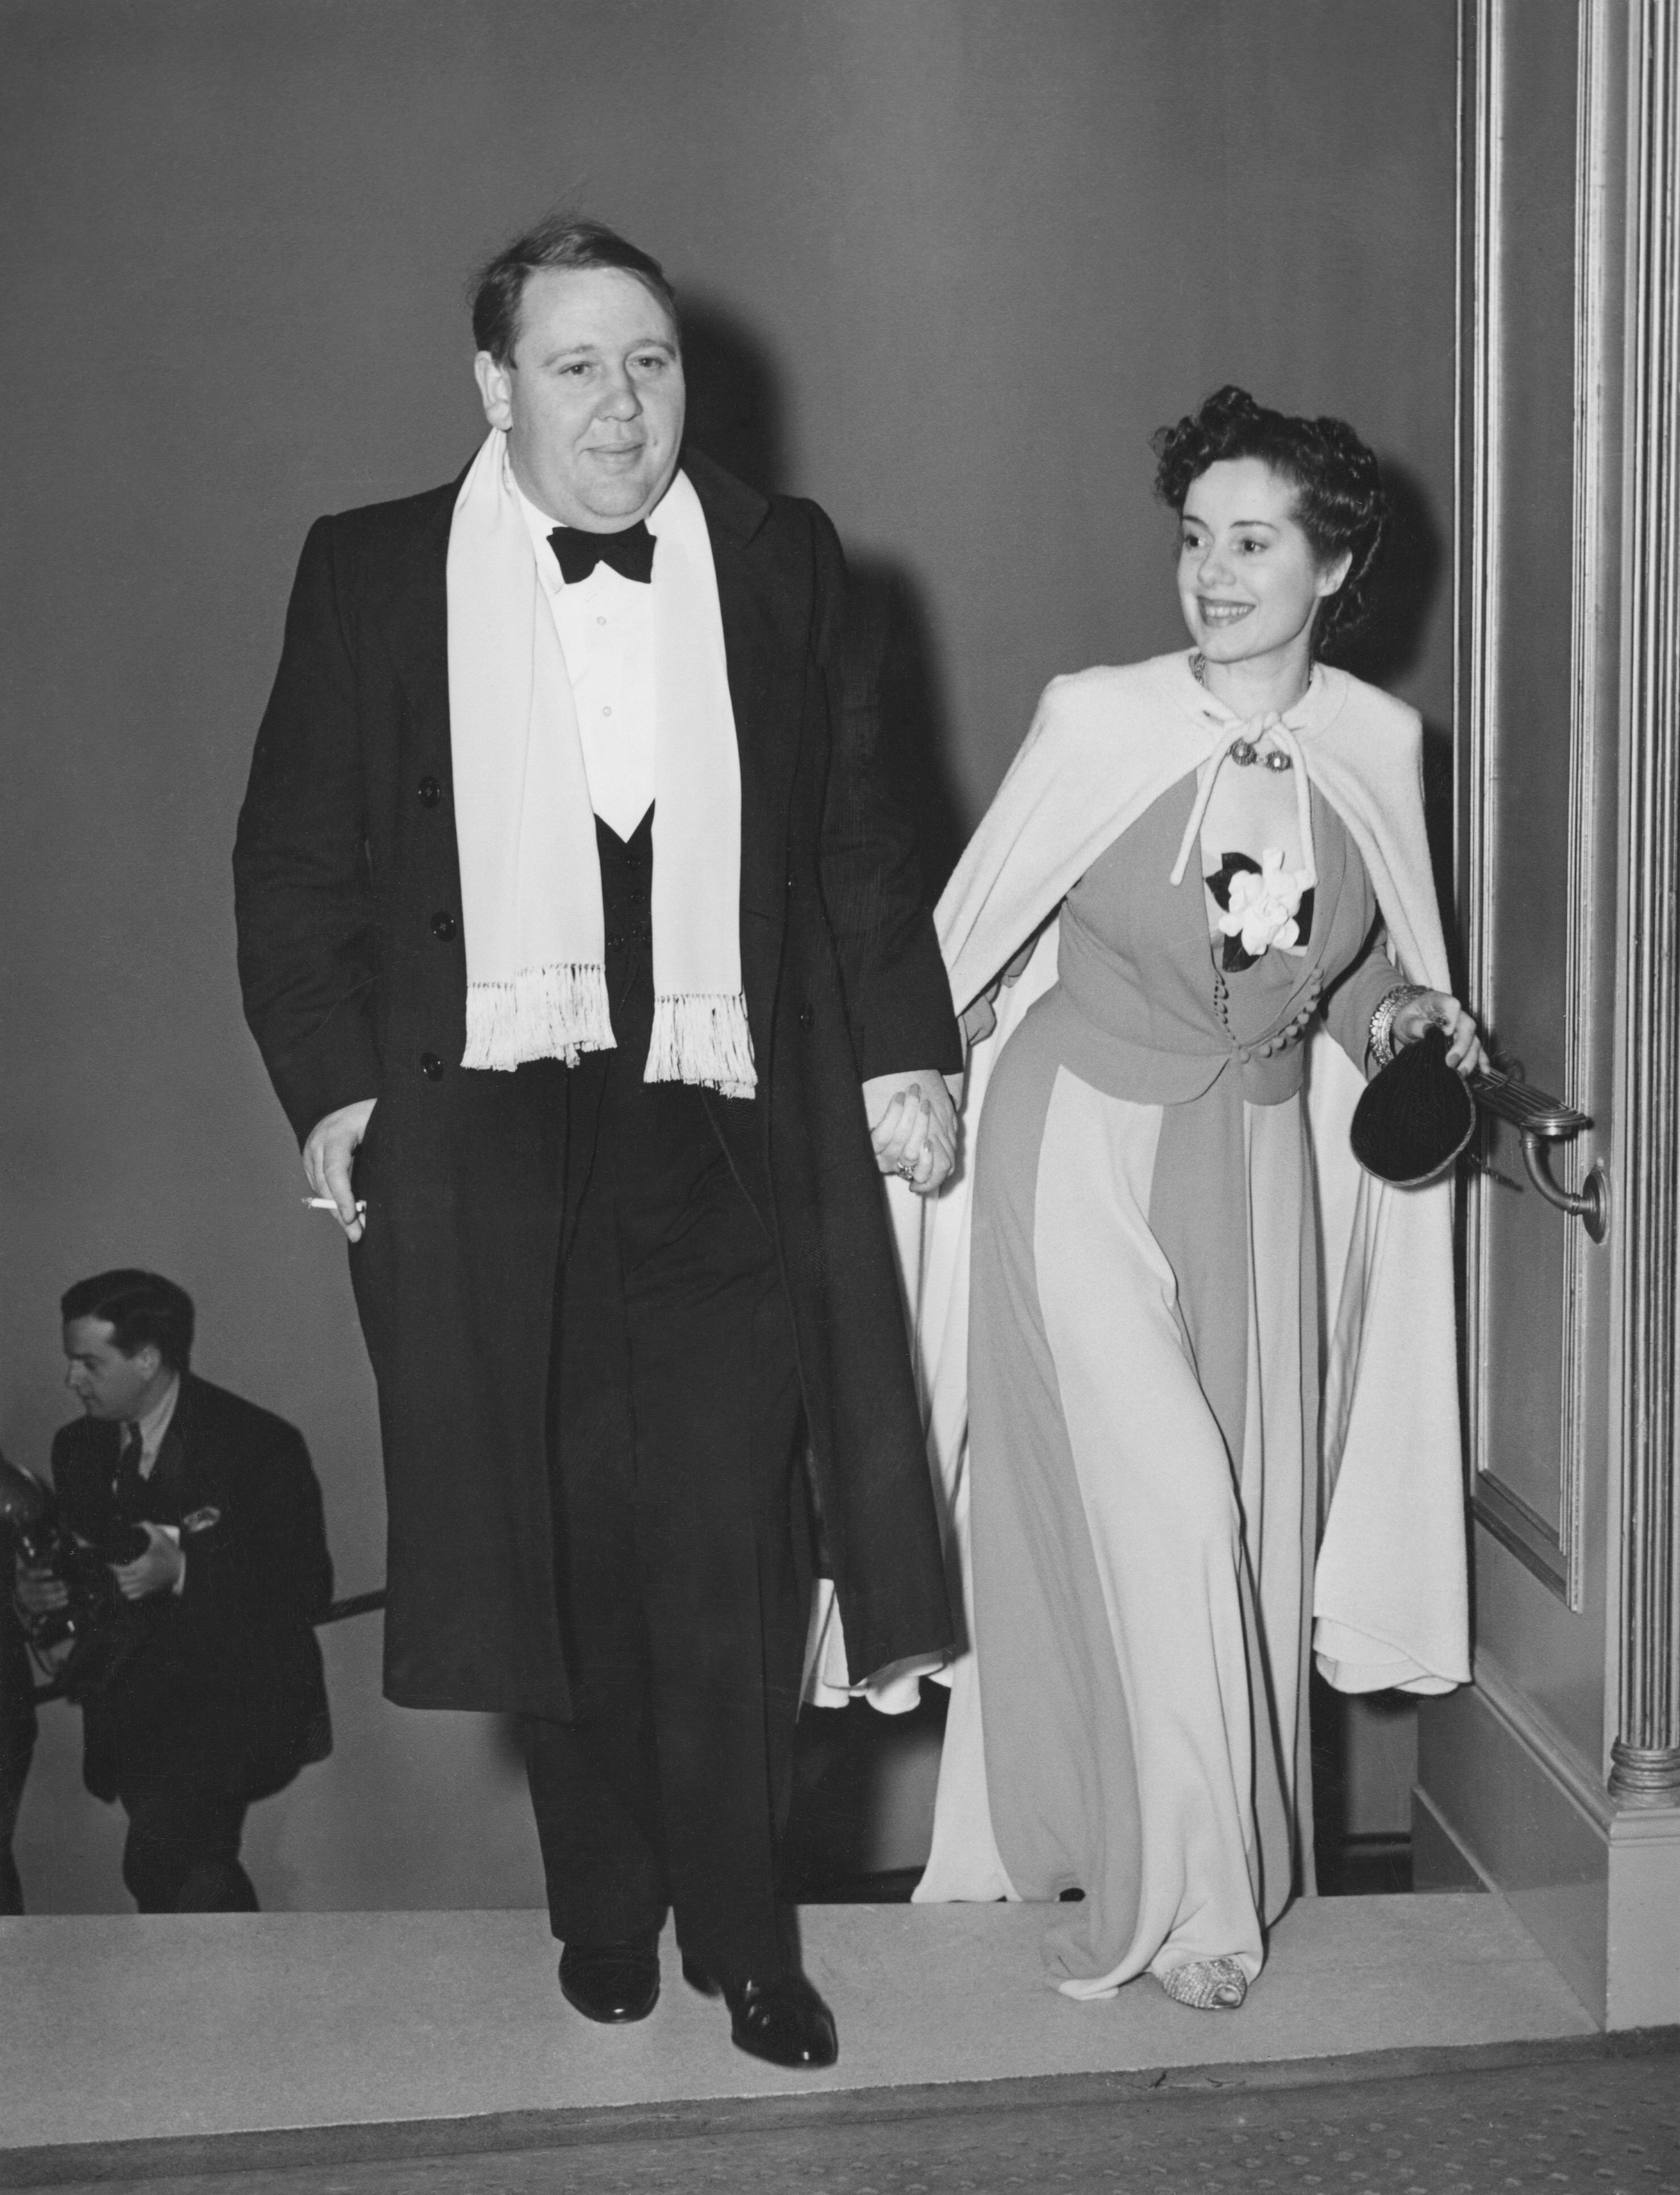 1940 | Oscars.org | Academy of Motion Picture Arts and Sciences2958 x 3864